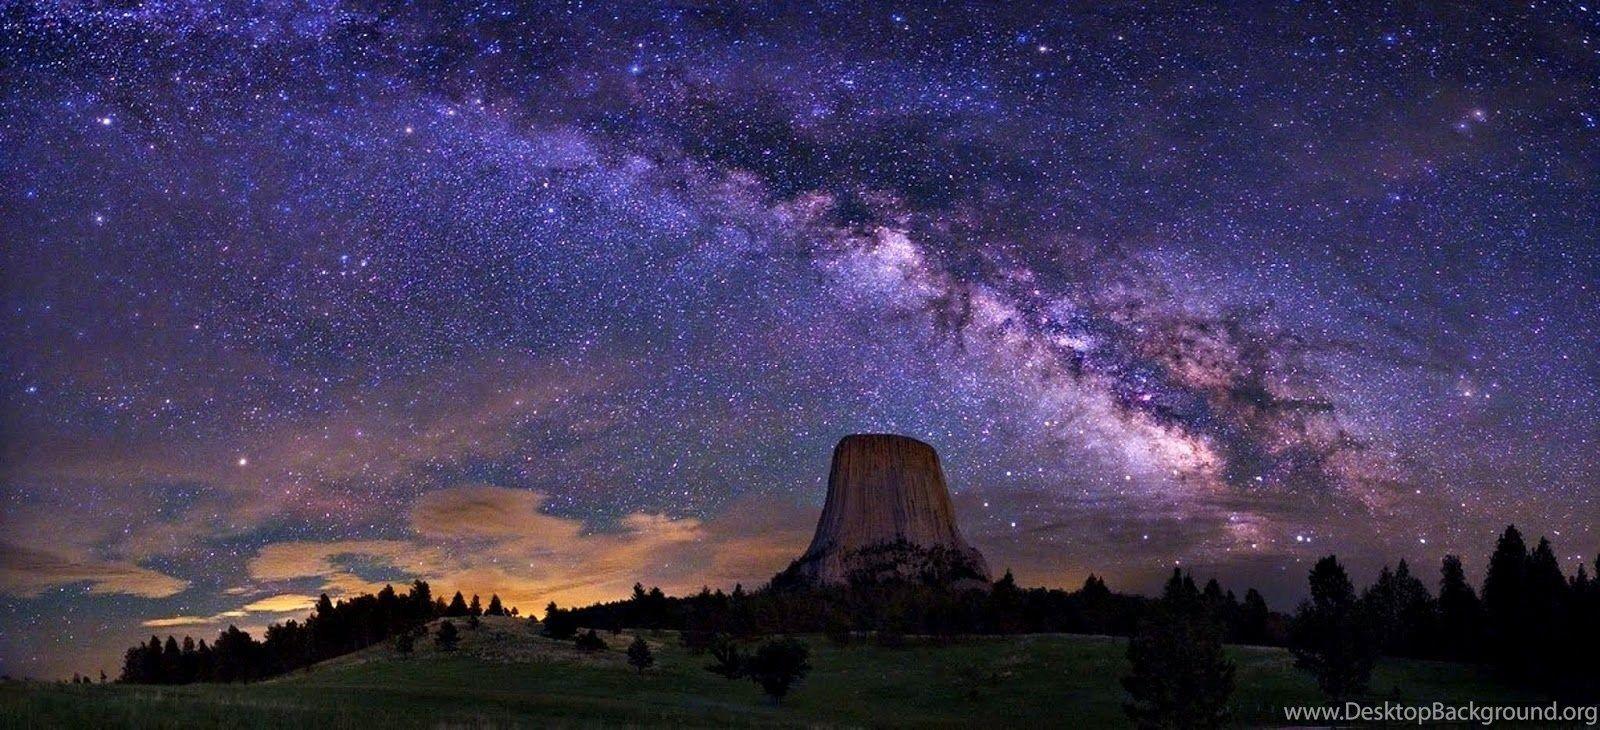 Milky Way Galaxy From Earth Wallpaper HD Pics About Space Desktop